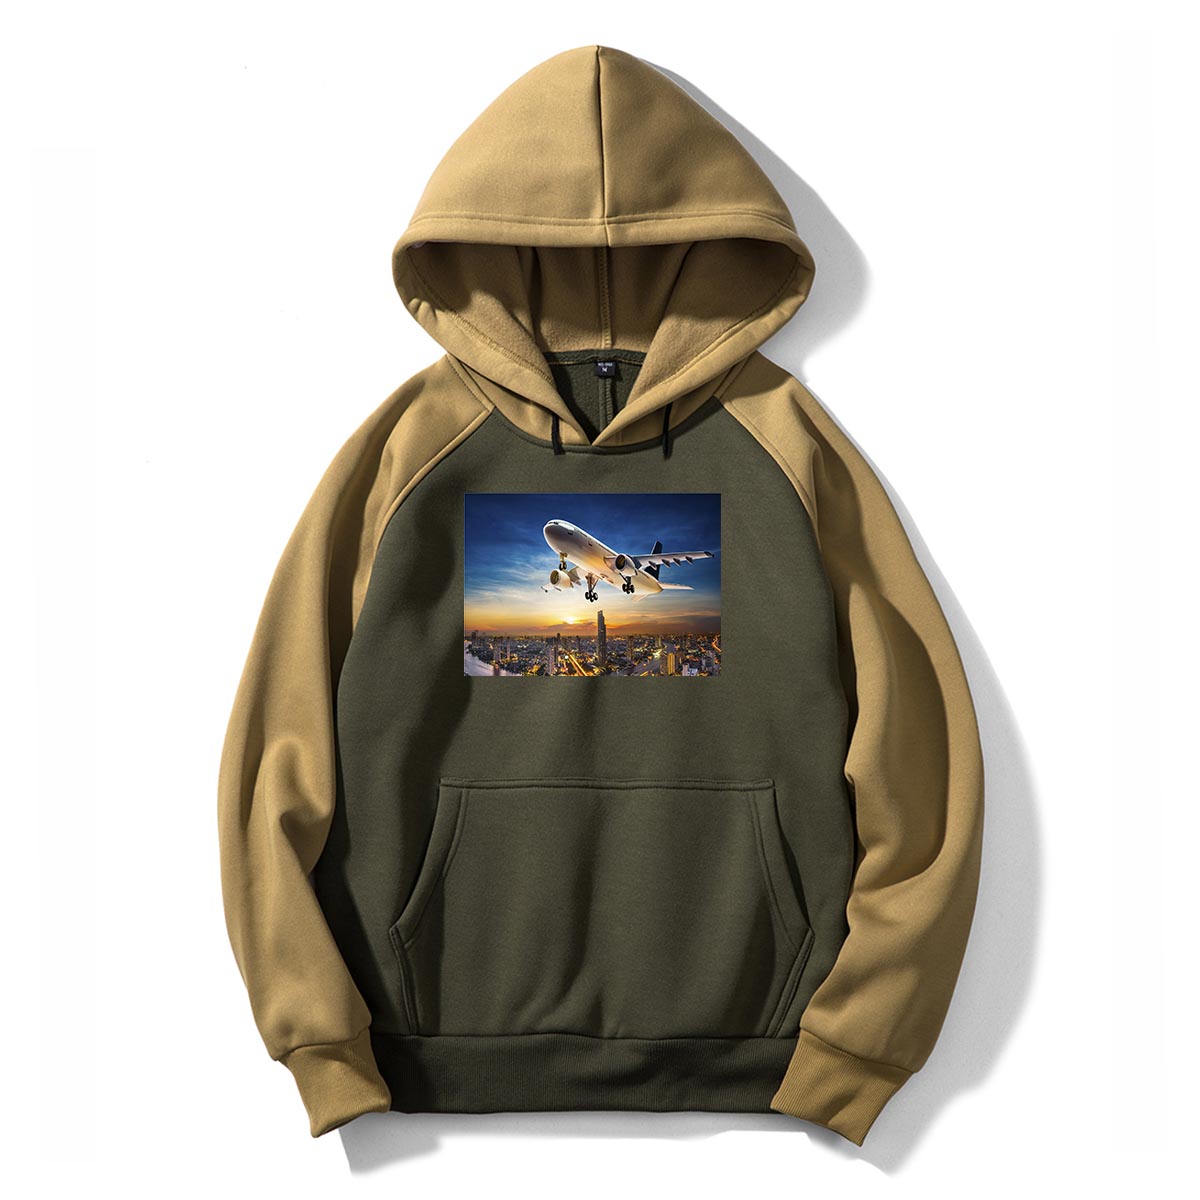 Super Aircraft over City at Sunset Designed Colourful Hoodies